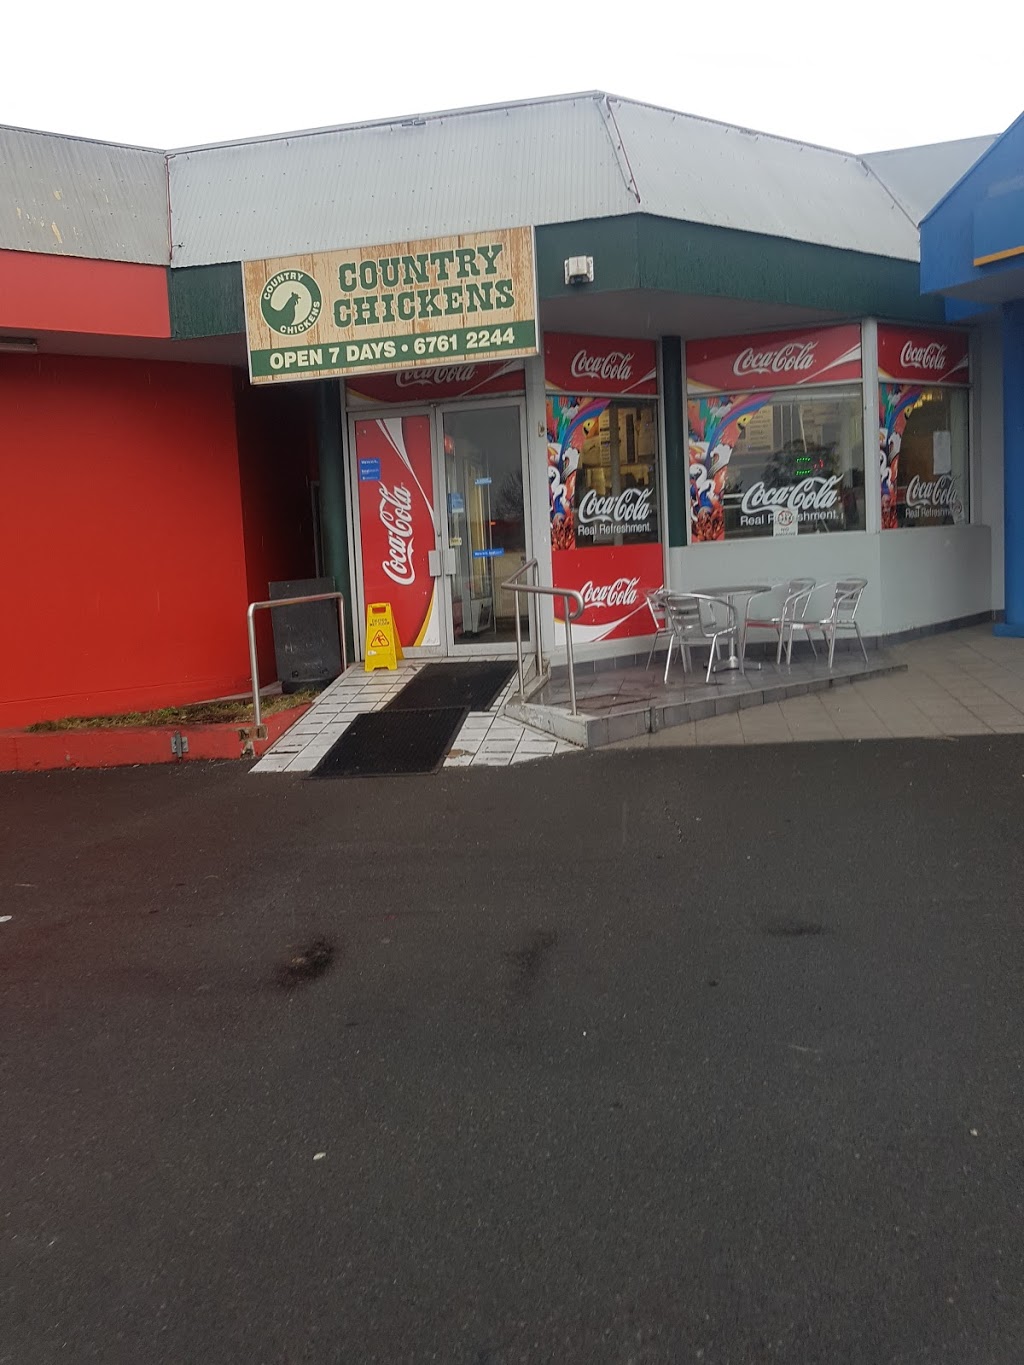 Country Chickens | meal takeaway | 2/186 Marius St, Tamworth NSW 2340, Australia | 0267612244 OR +61 2 6761 2244